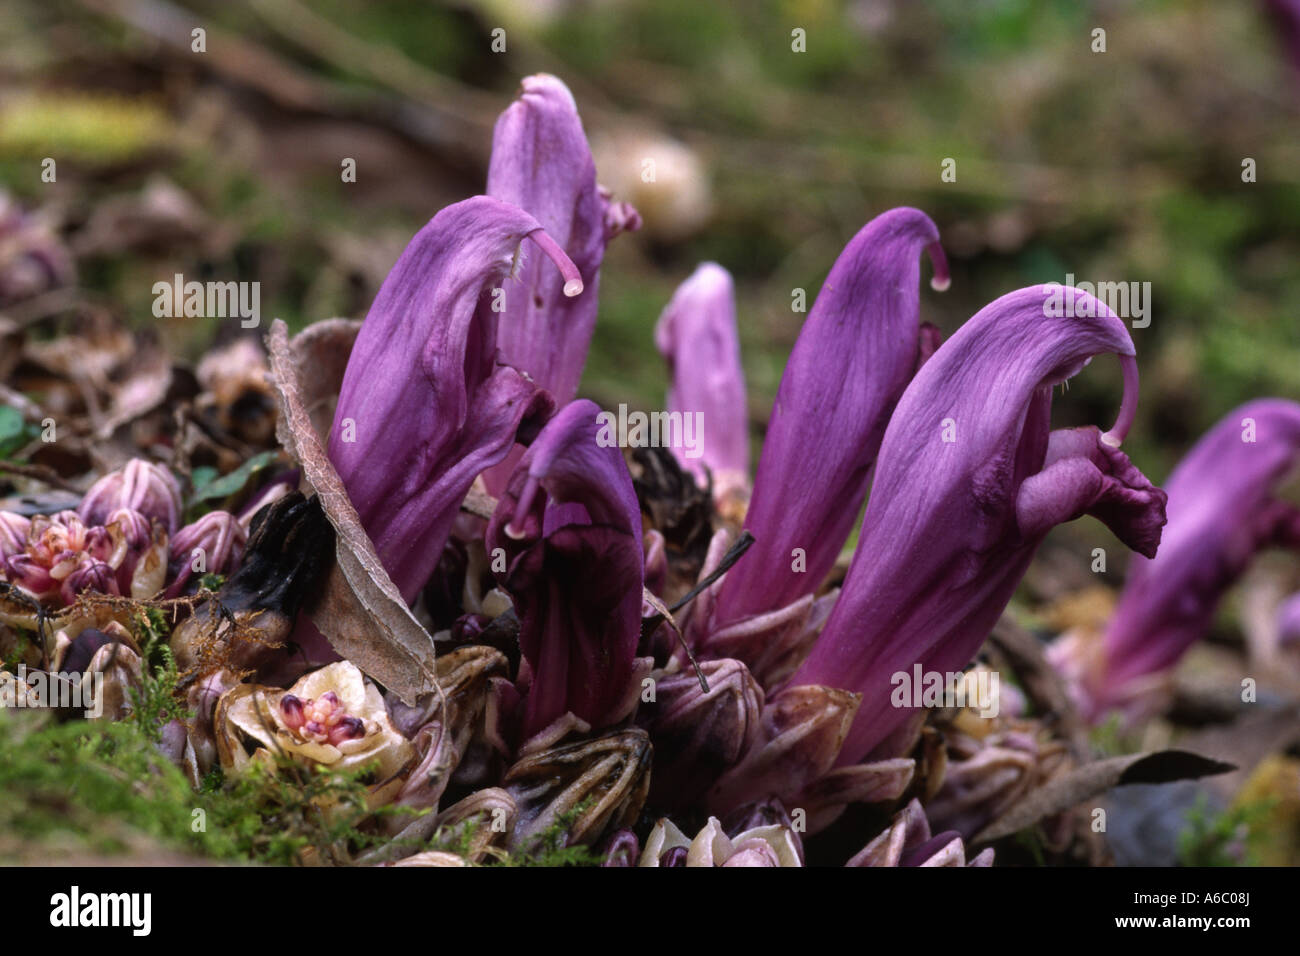 Flowering Purple Toothwort (Lathraea clandestina). The plant is parasitic on the roots of trees. Stock Photo